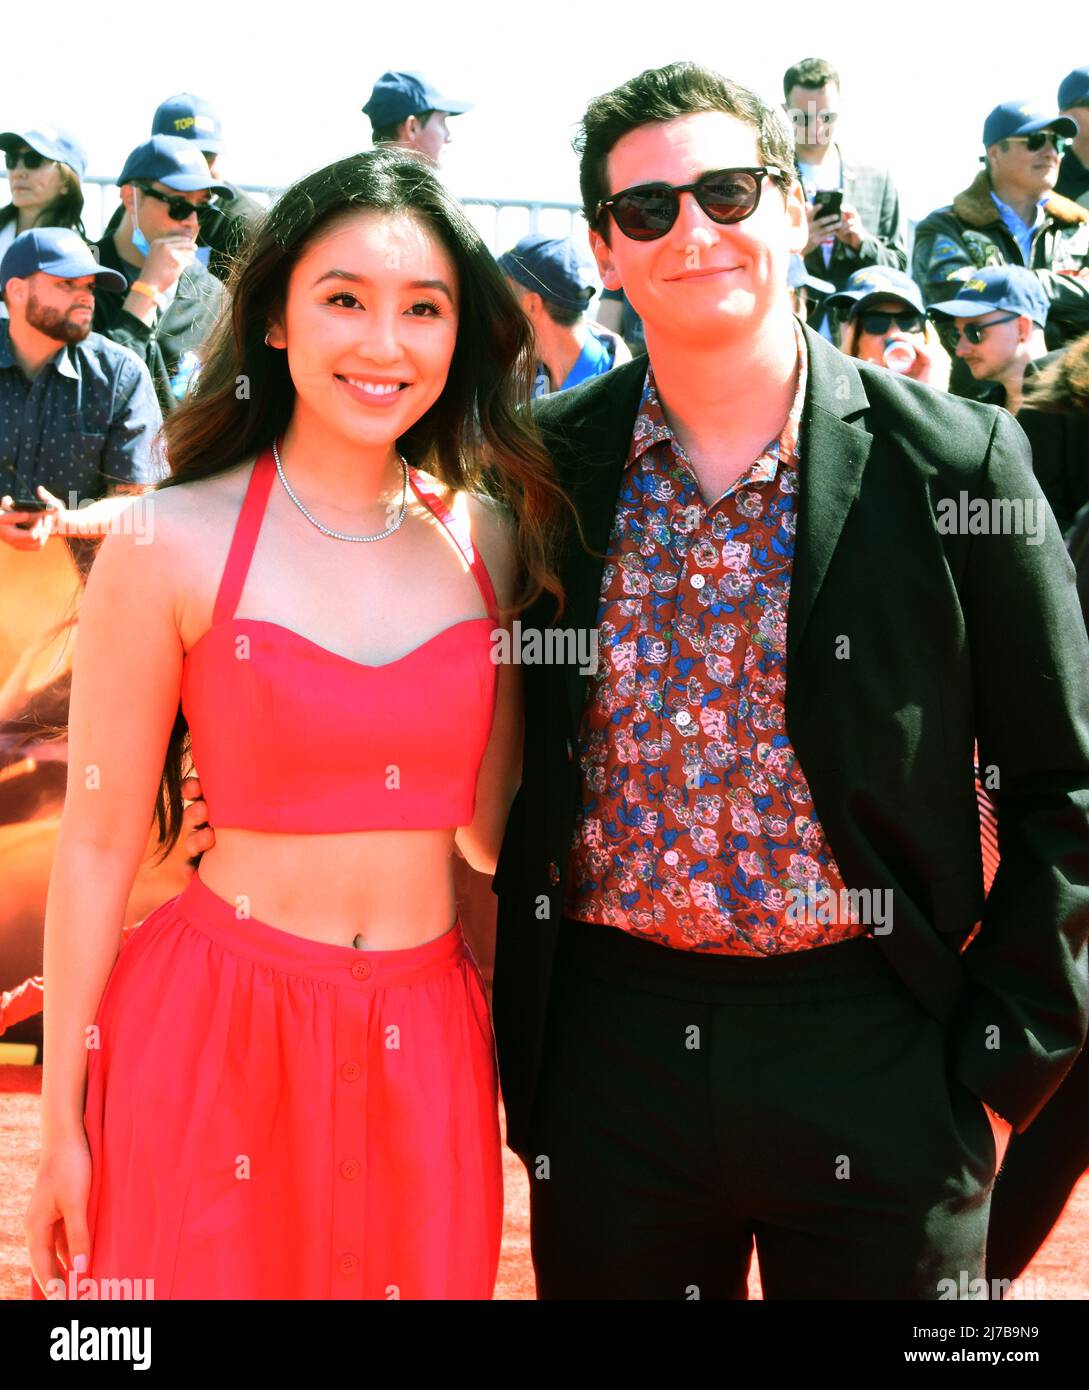 San Diego, California, USA 4th May 2022 Olivia Sui and Actor Sam Lerner attends The Global Premiere of Top Gun: Maverick at USS MIDWAY on May 4, 2022 in San Diego, California, USA. Photo by Barry King/Alamy Stock Photo Stock Photo